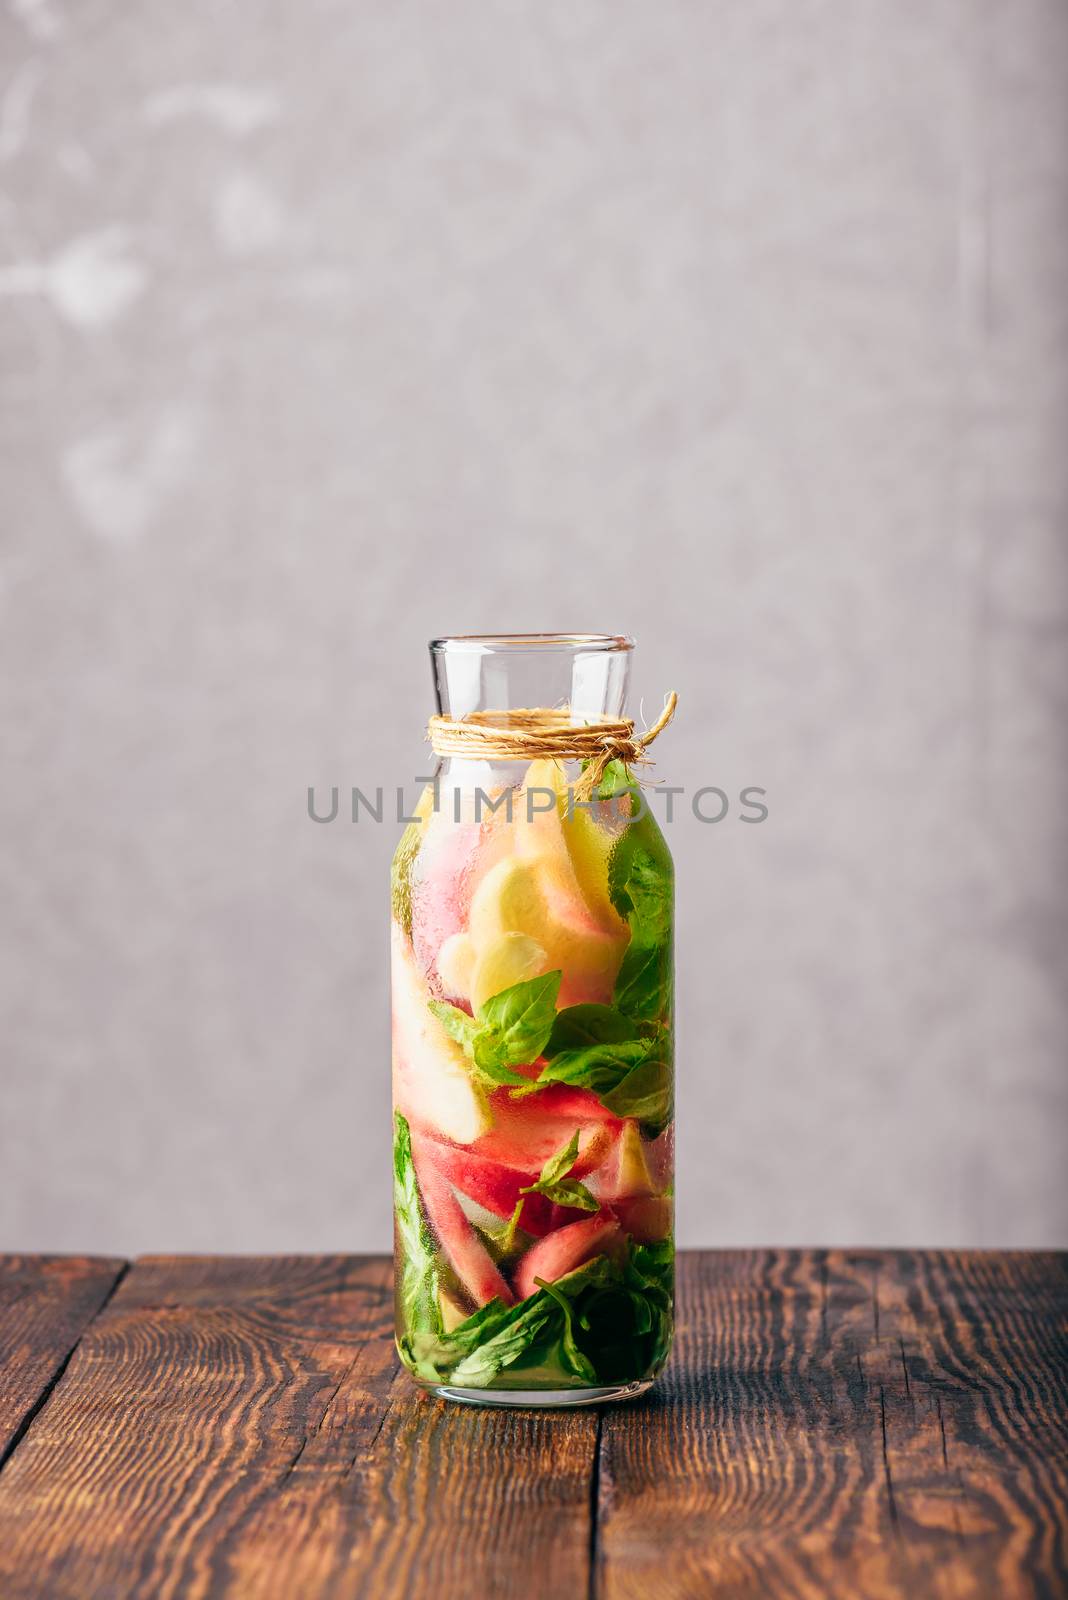 Bottle of Infused Water with Sliced Peach and Basil Leaves. Vertical Orientation.